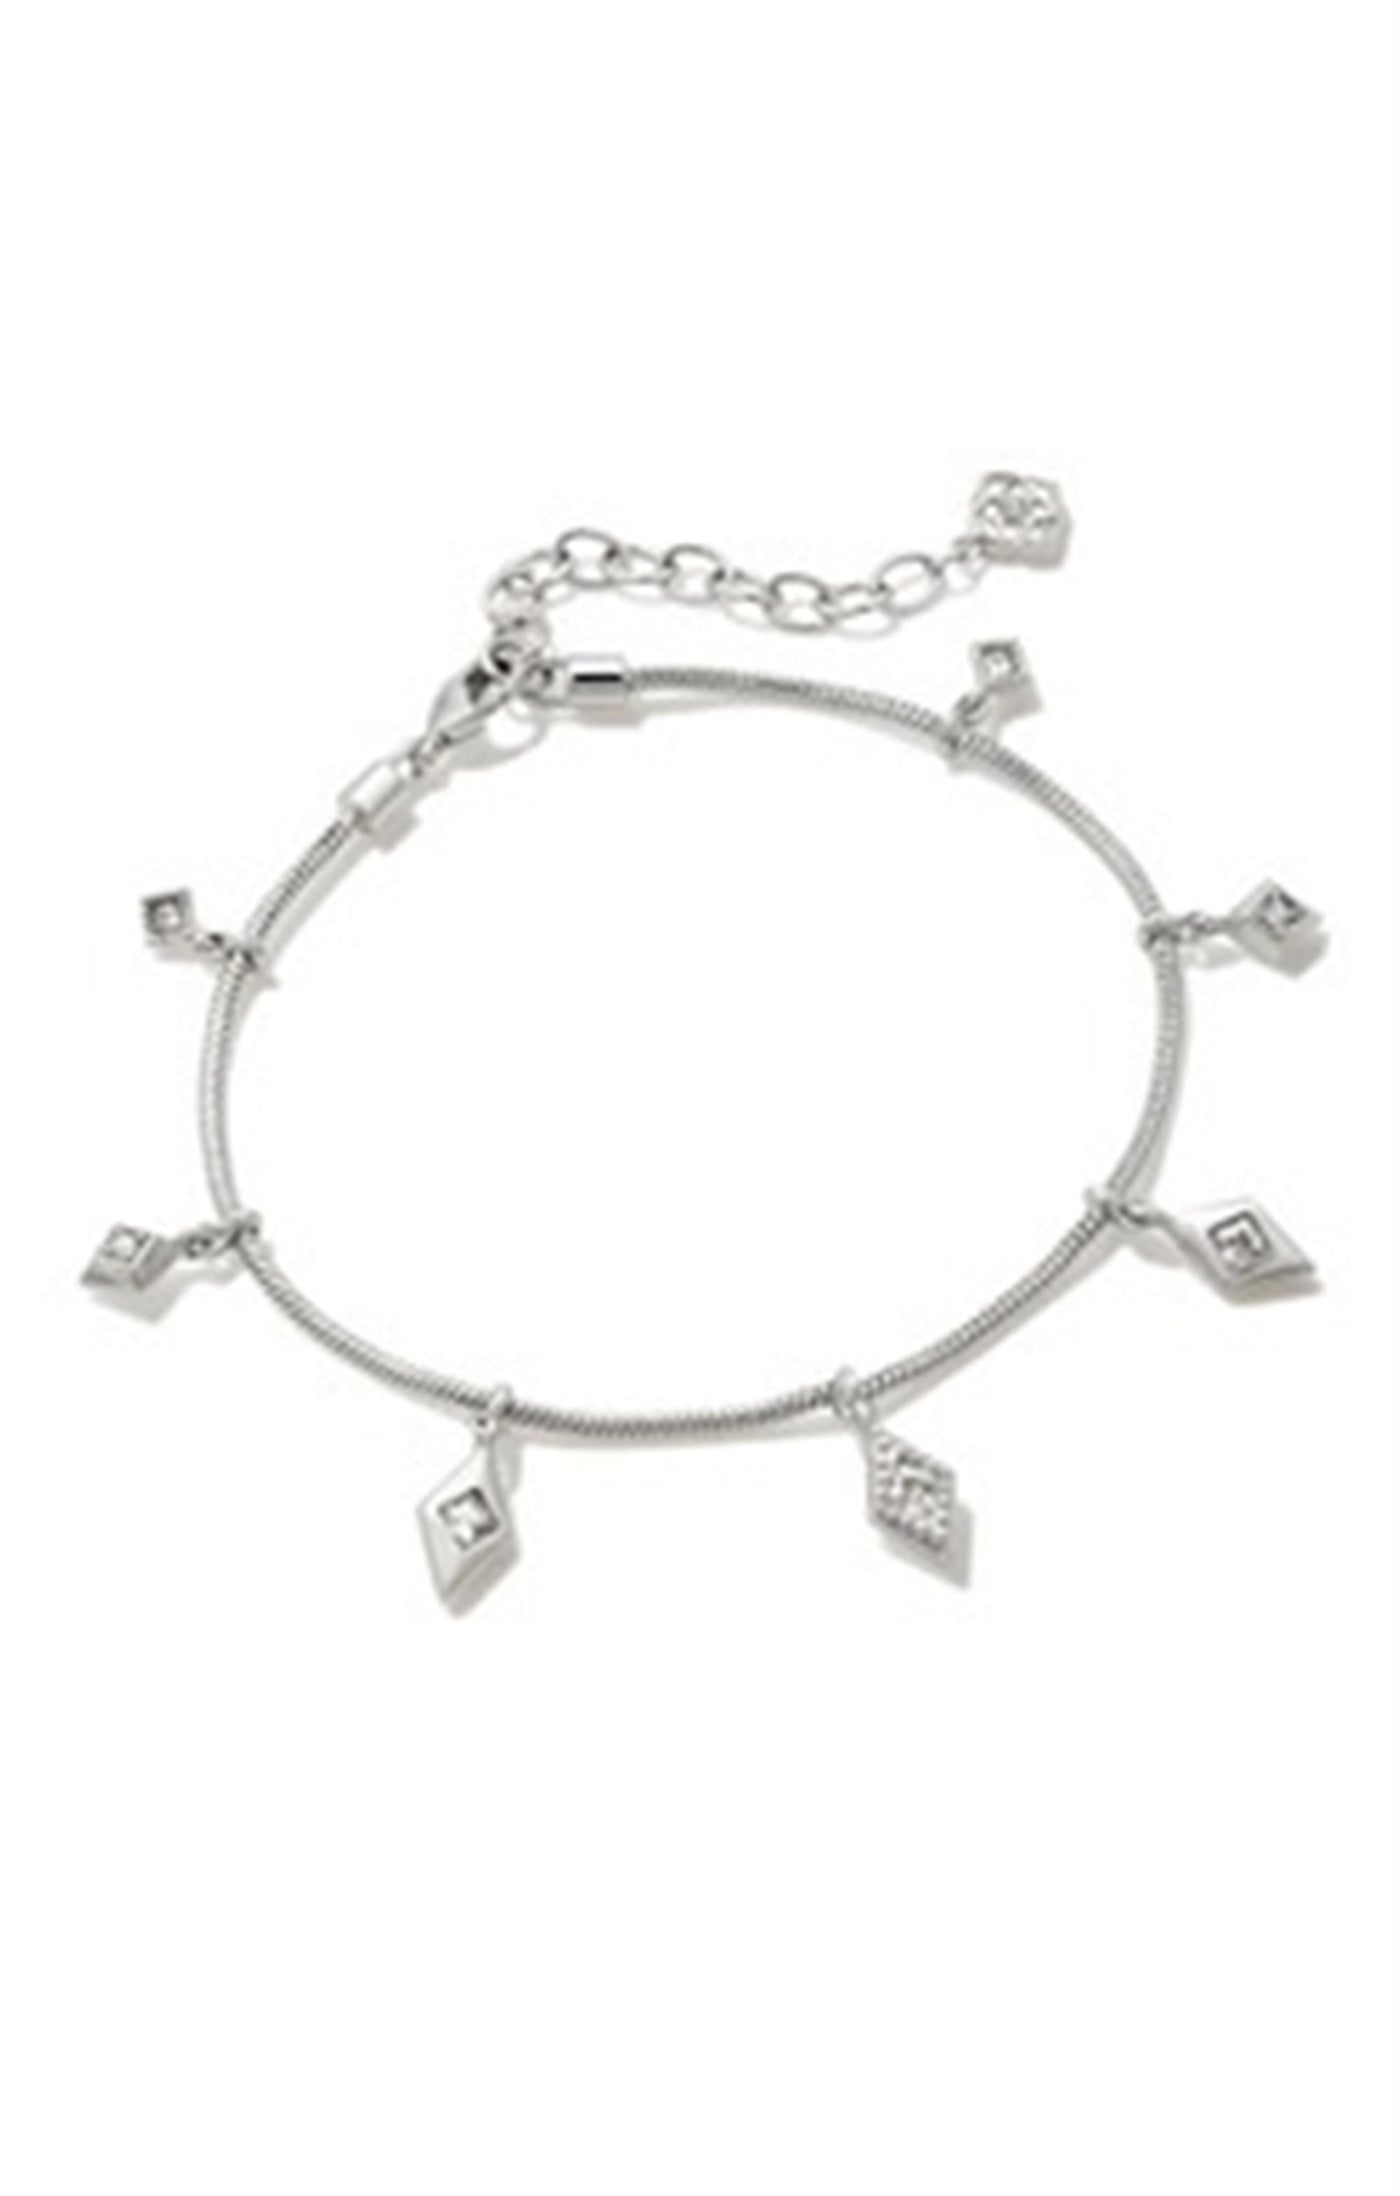 Silver Tone Bracelet Featuring White Crystal by Kendra Scott